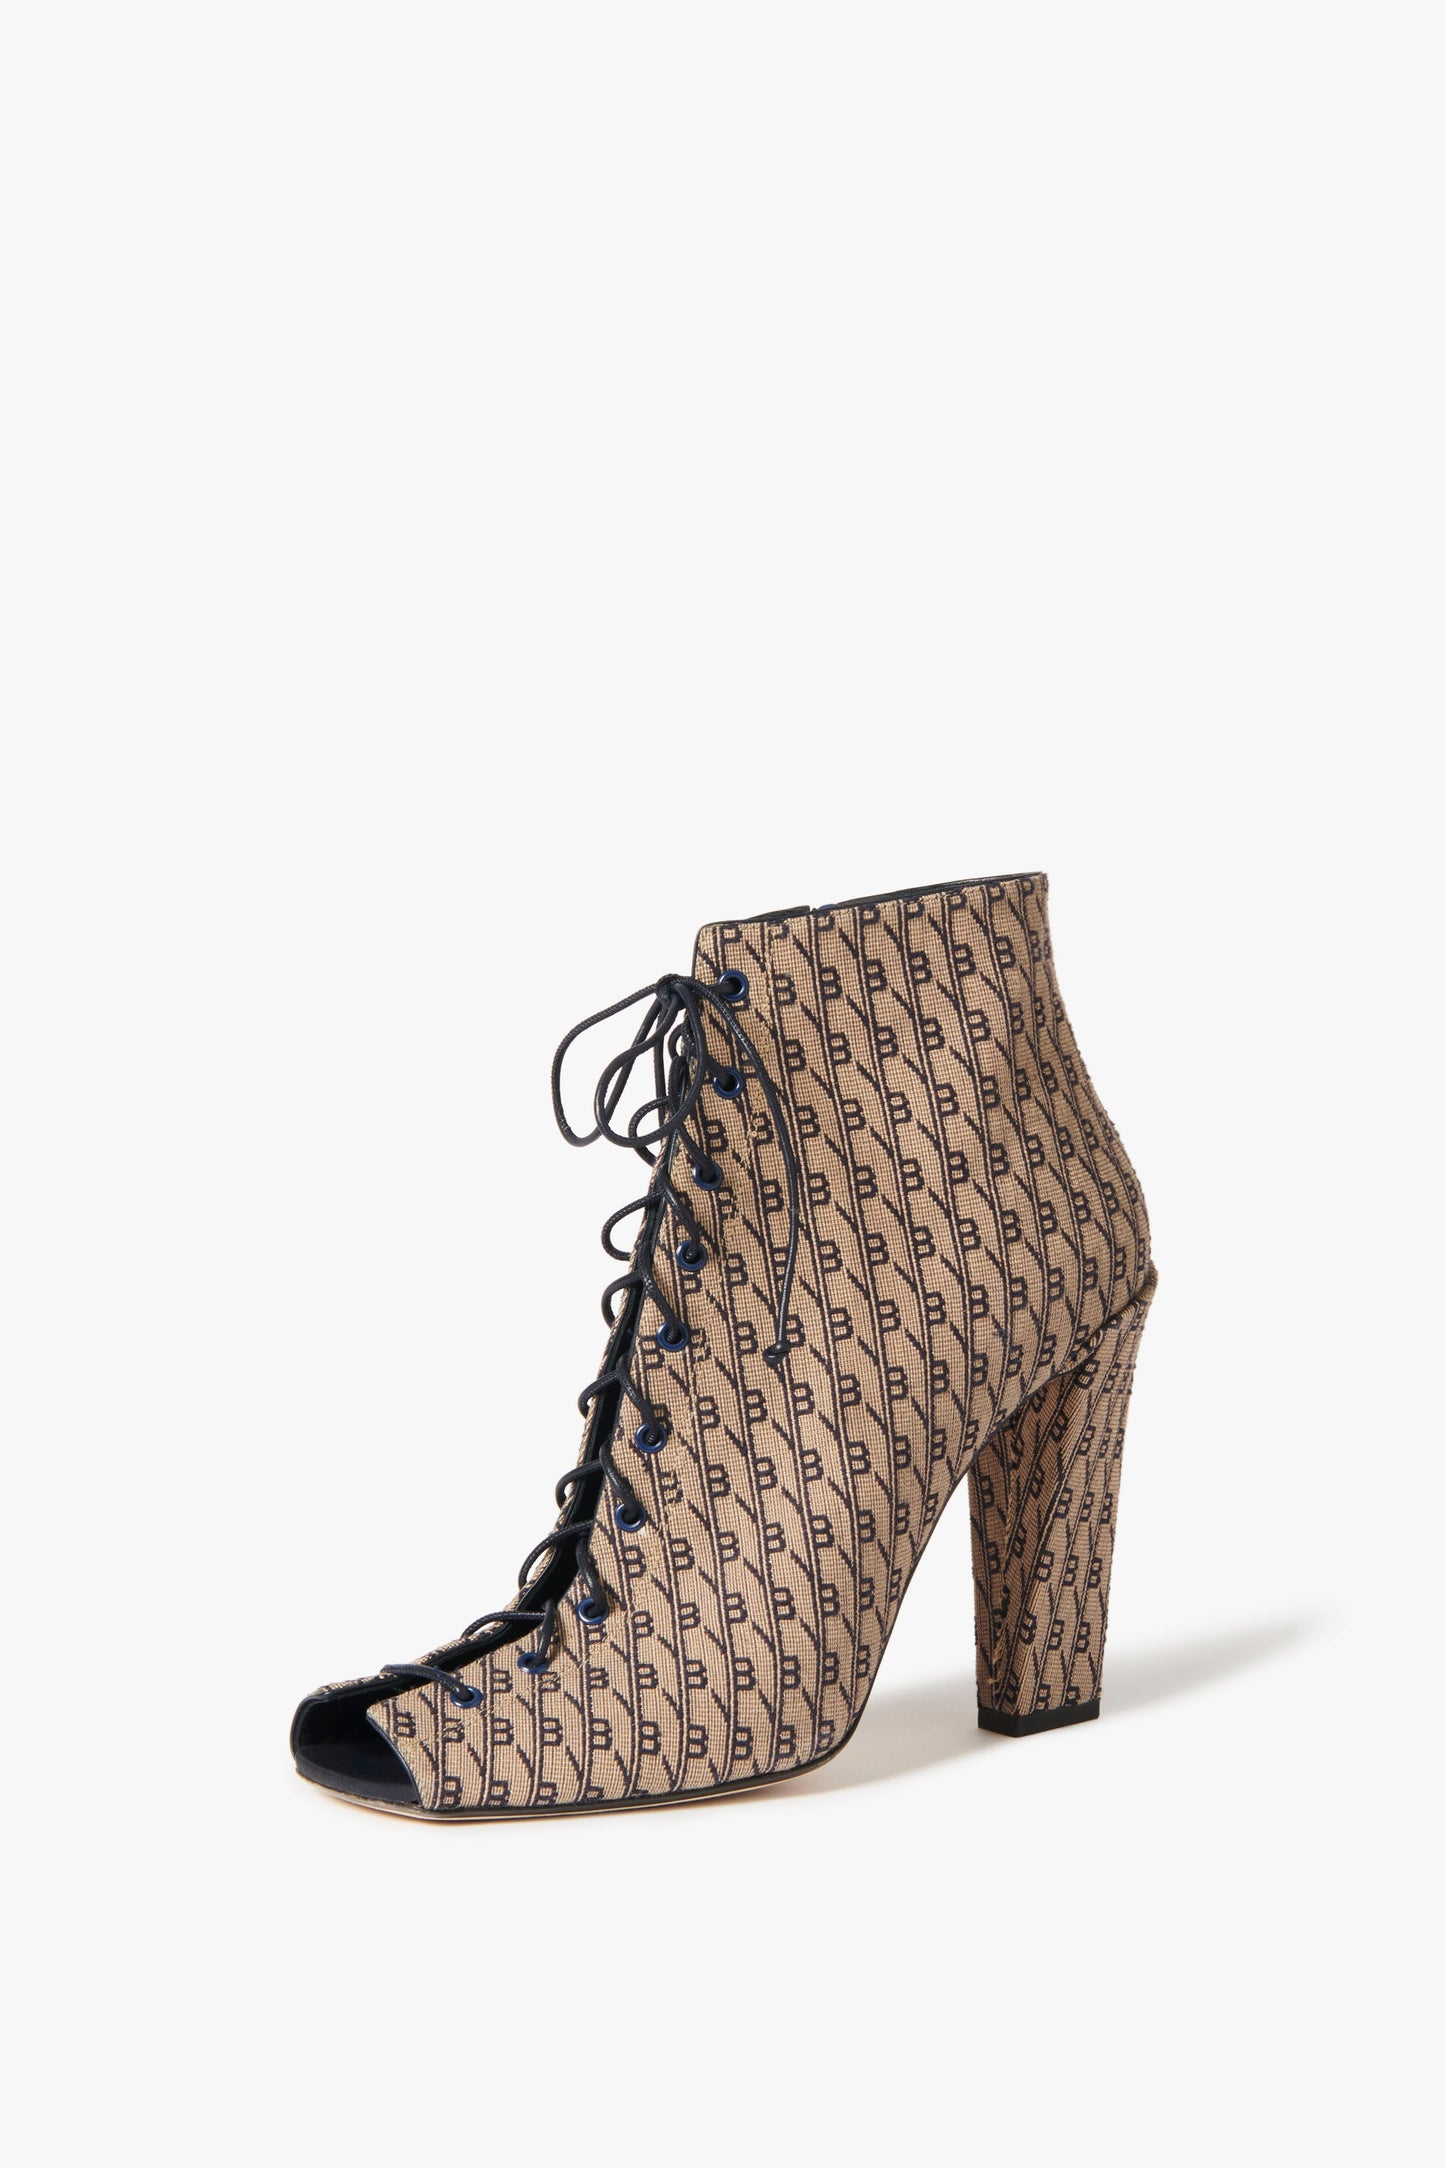 Victoria Beckham Reese Boots in House Monogram Jacquard 39